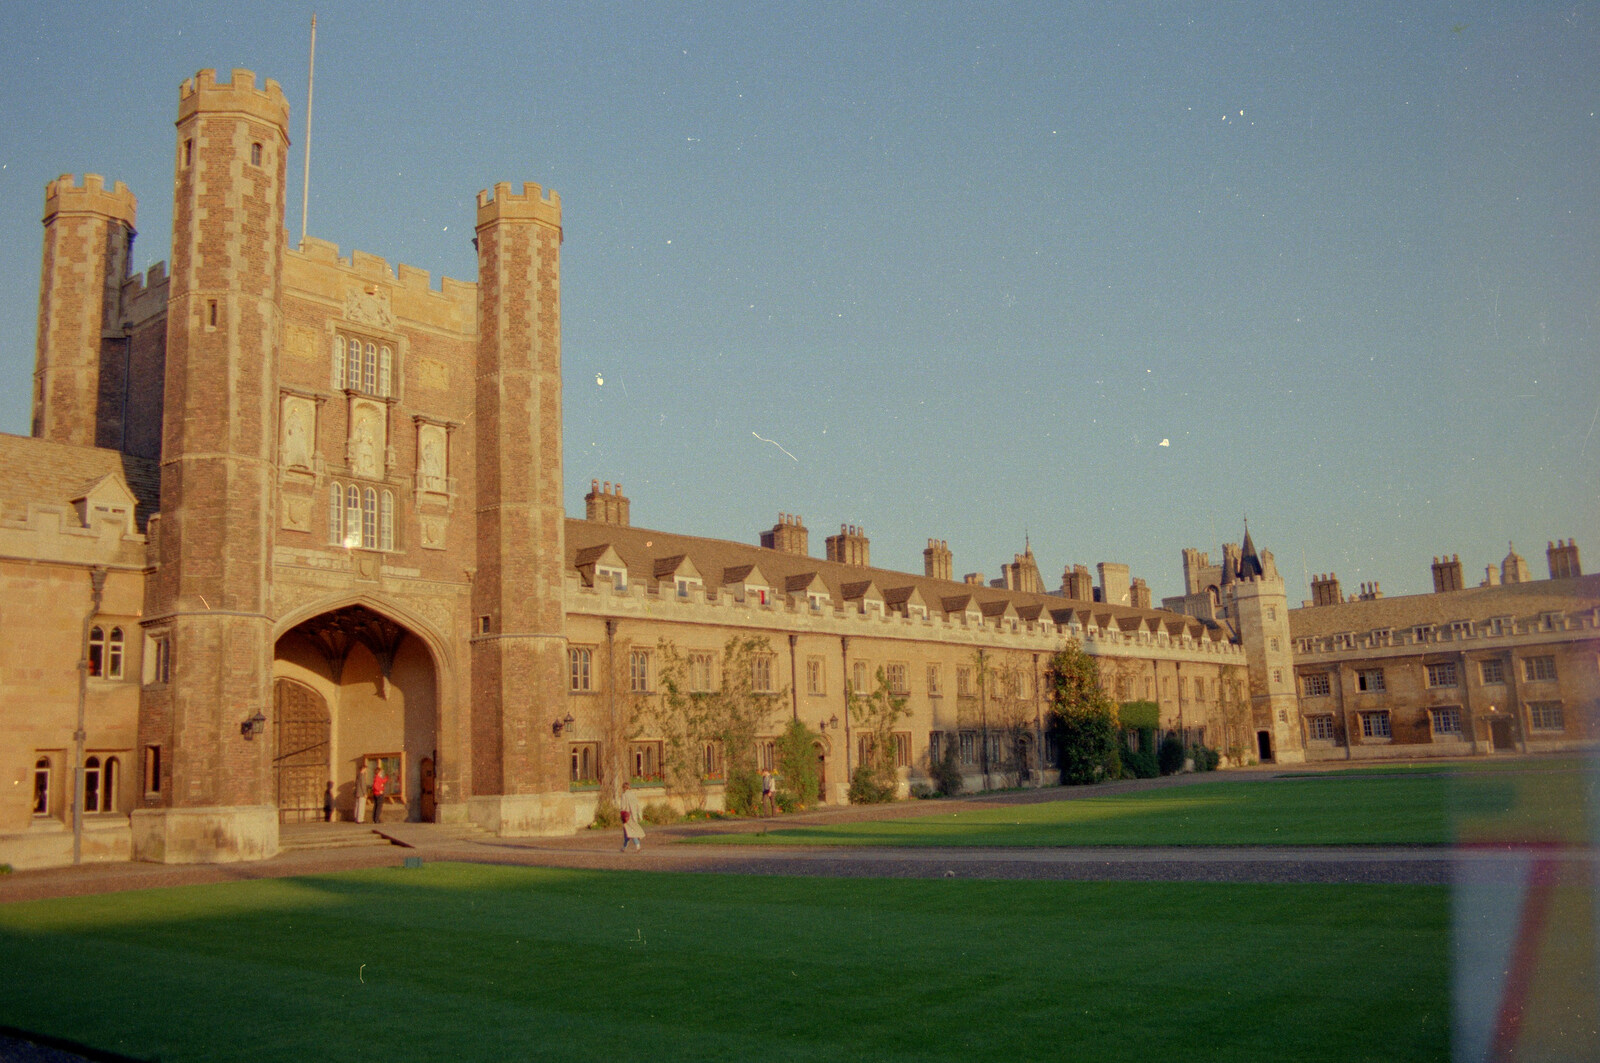 Trinity college from A Trip to Trinity College, Cambridge - 23rd March 1986